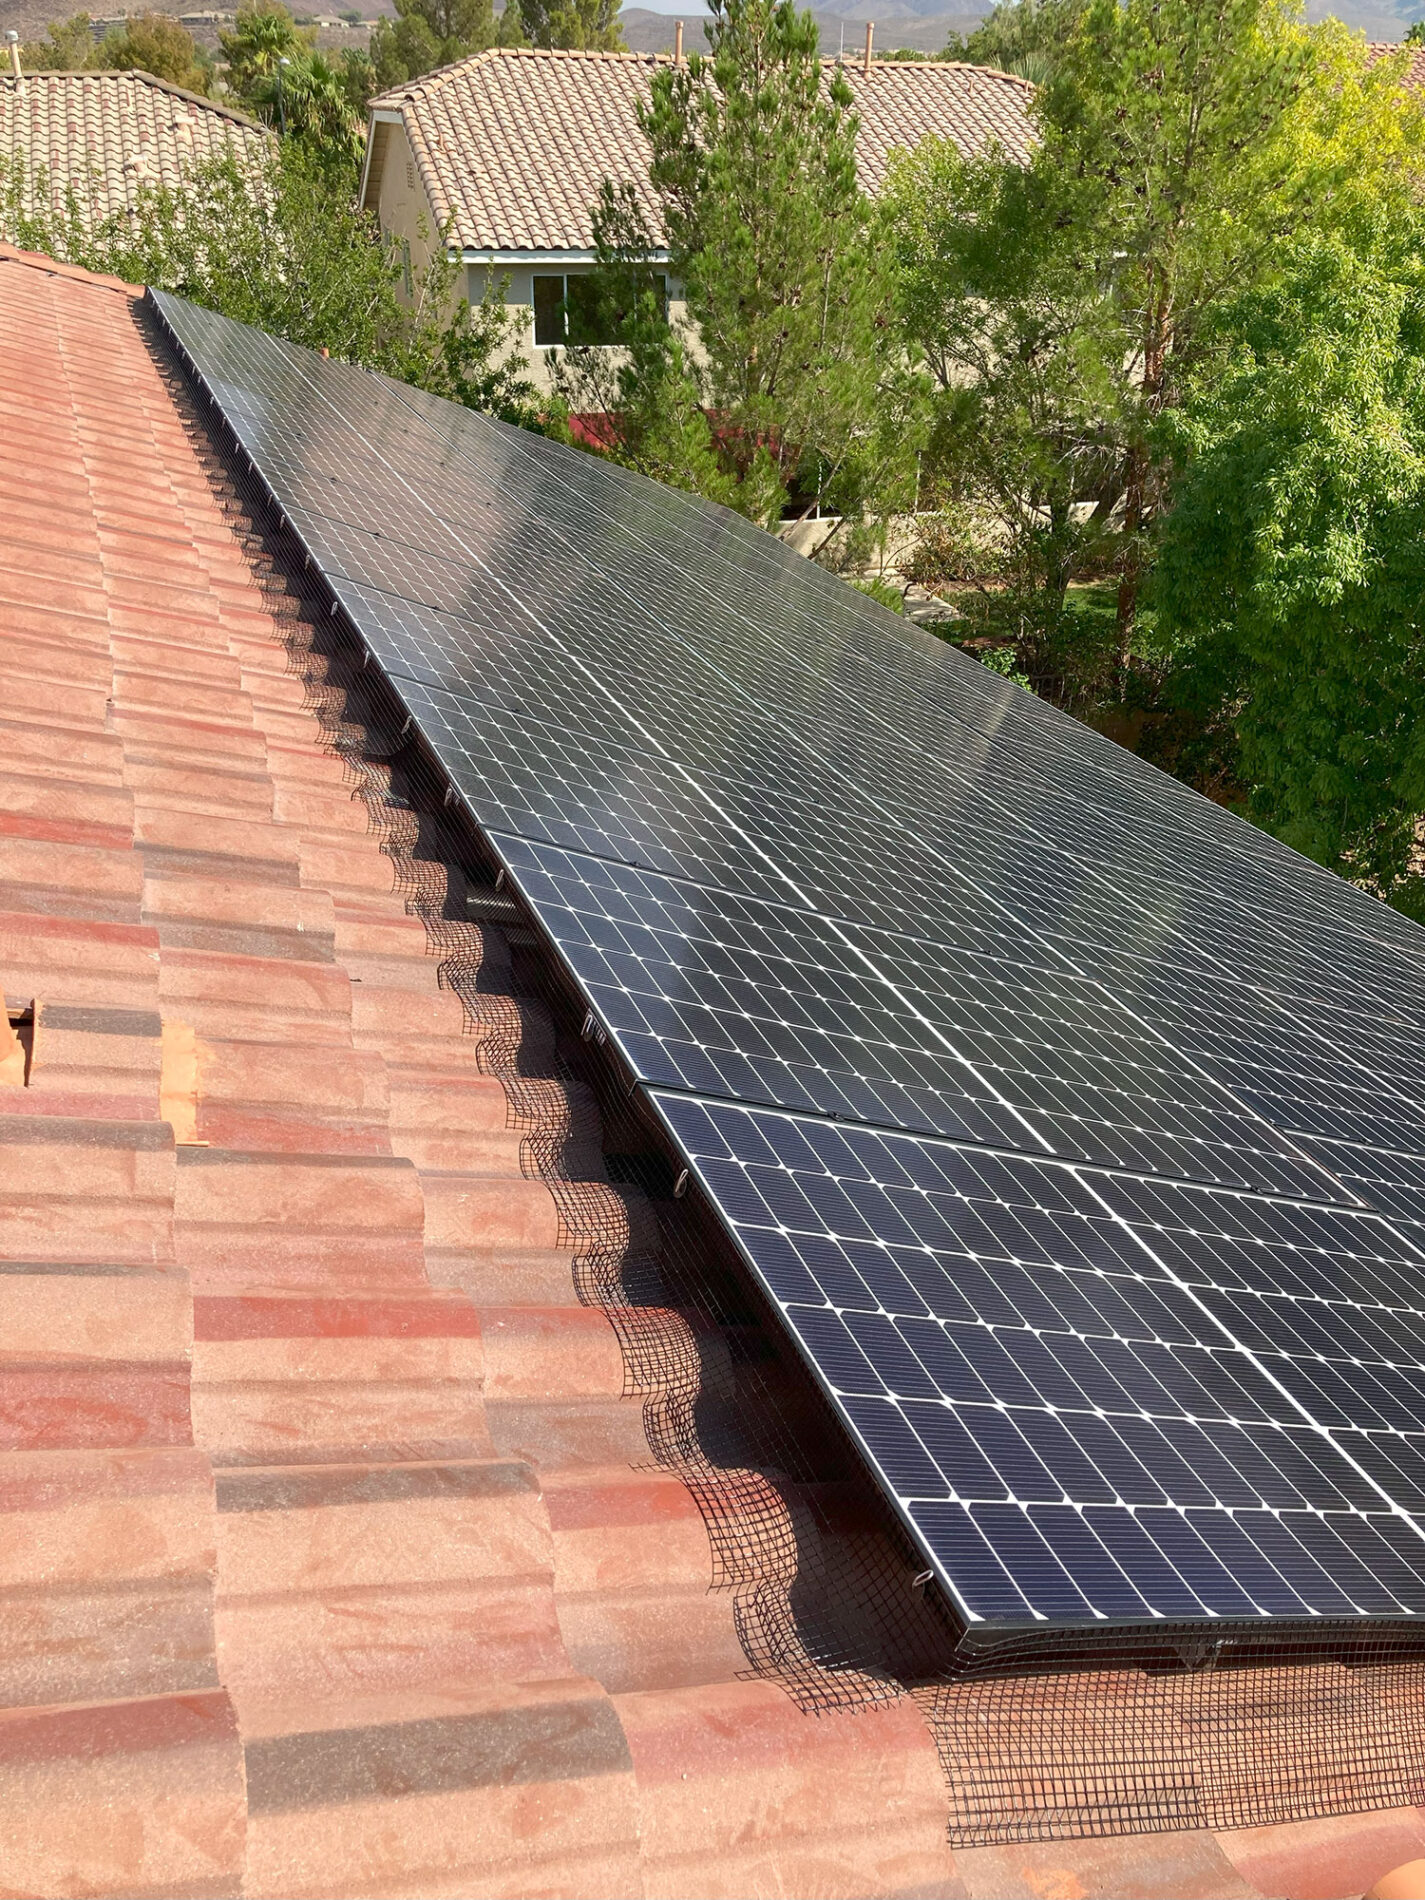 Solar services, Anthem, Southern Nevada, renewable energy, solar panels, sustainable living, energy efficiency, solar installation, climate, weather patterns